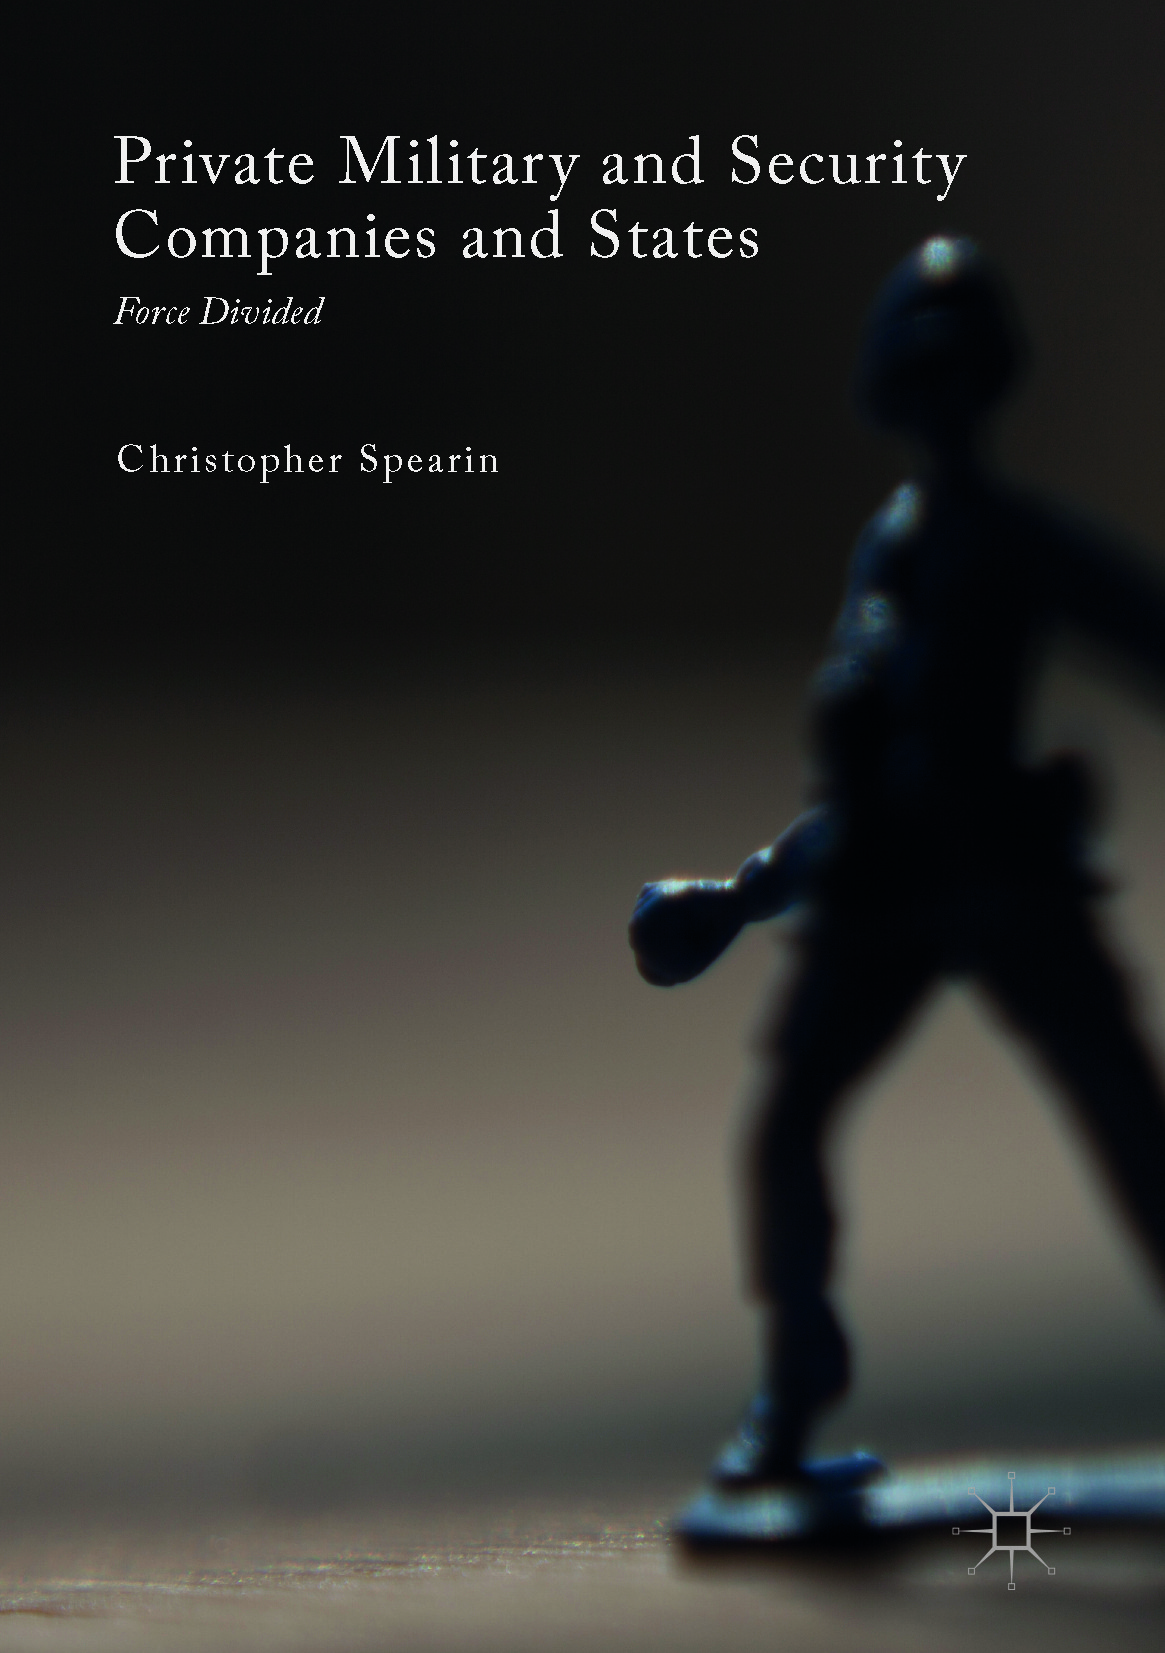 Spearin, Christopher - Private Military and Security Companies and States, ebook